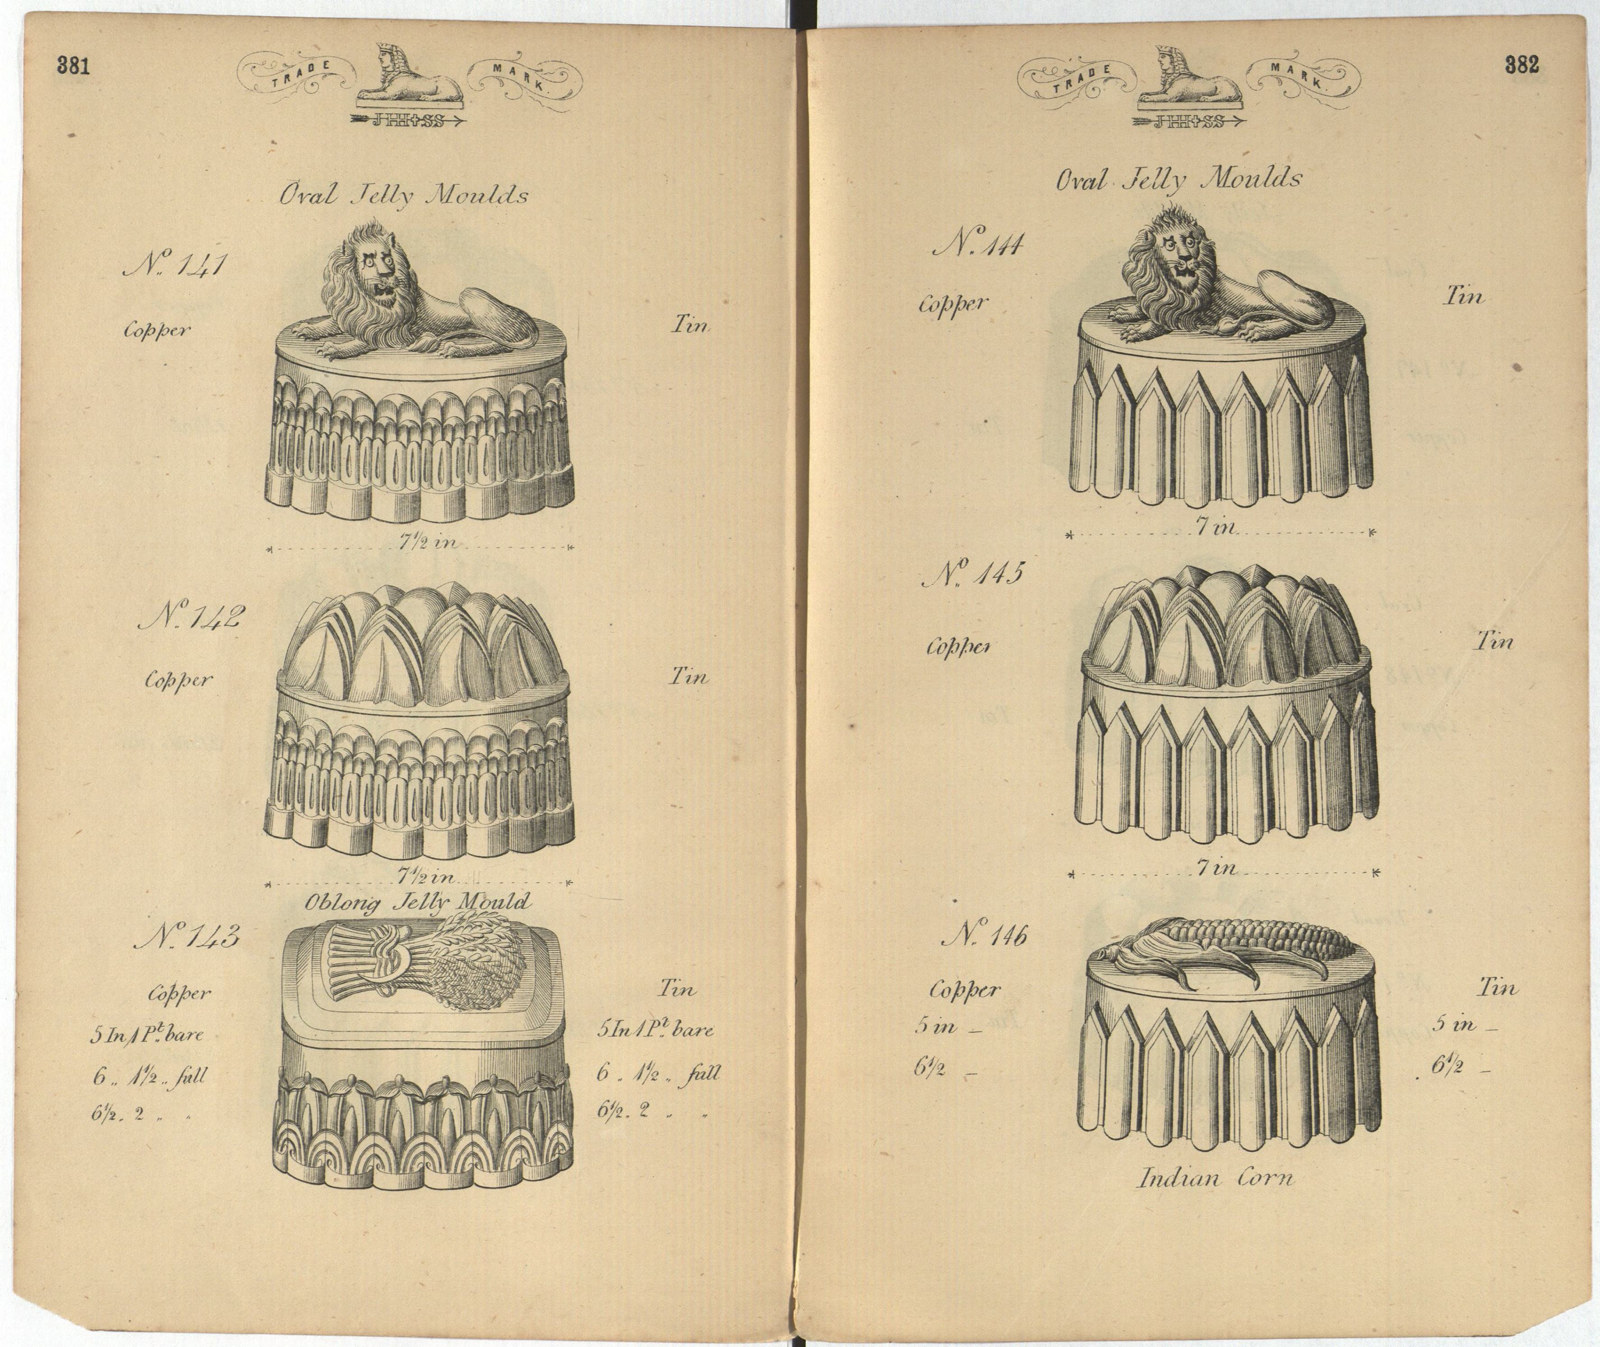 Page from book showing six different jelly mould shapes.